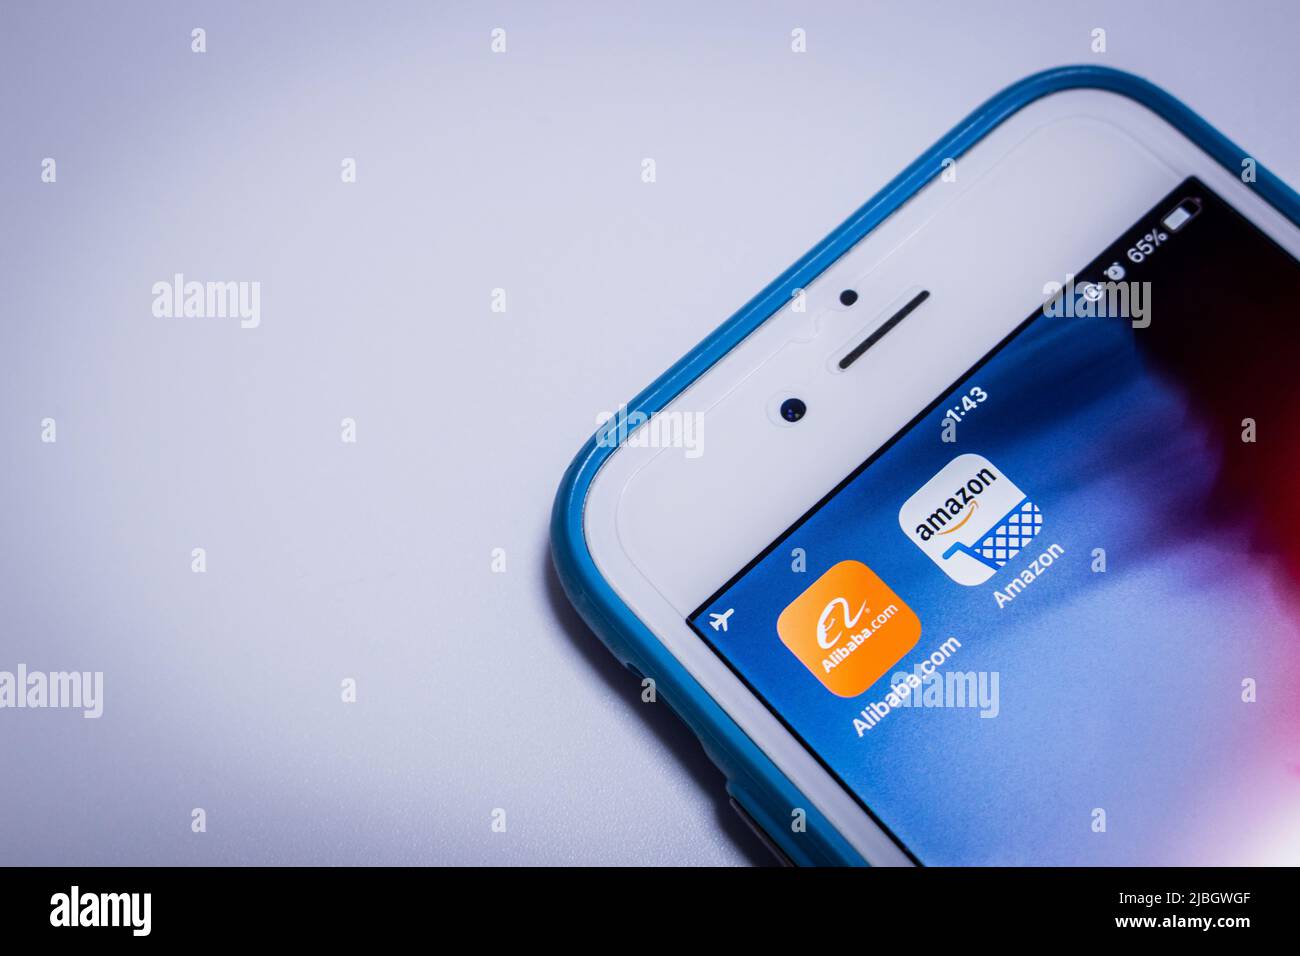 Amazon & Alibaba, 2 big tech giants, on an iPhone. Alibaba is Chinese multinational conglomerate holding company specialised in ecommerce and IT tech. Stock Photo